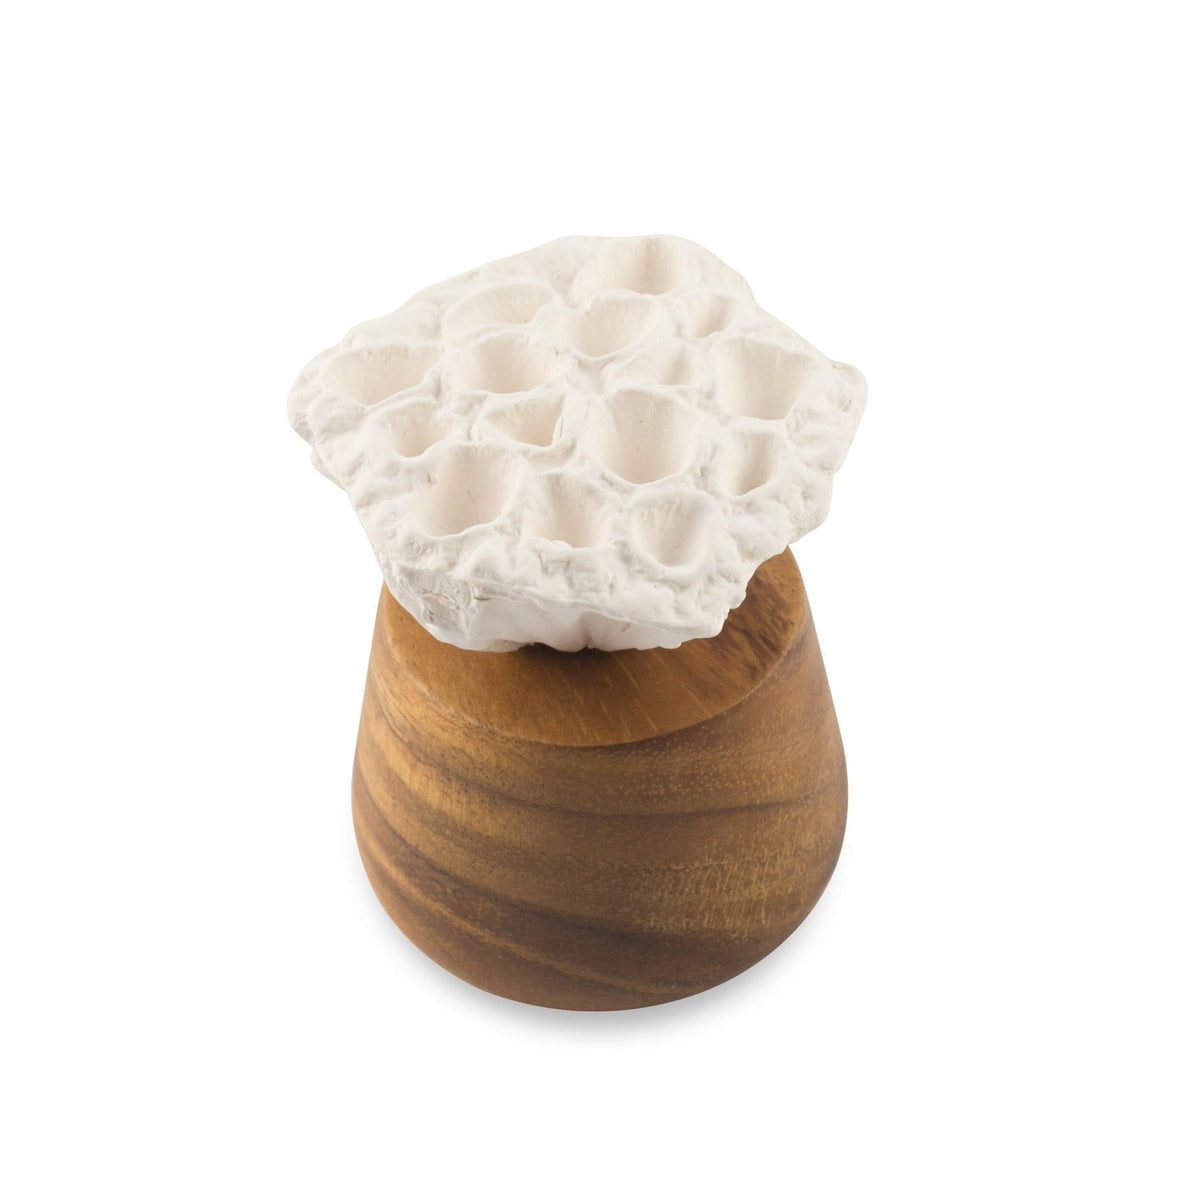 Hysses Home Scents Lotus Pod Refreshment Scenting Clay